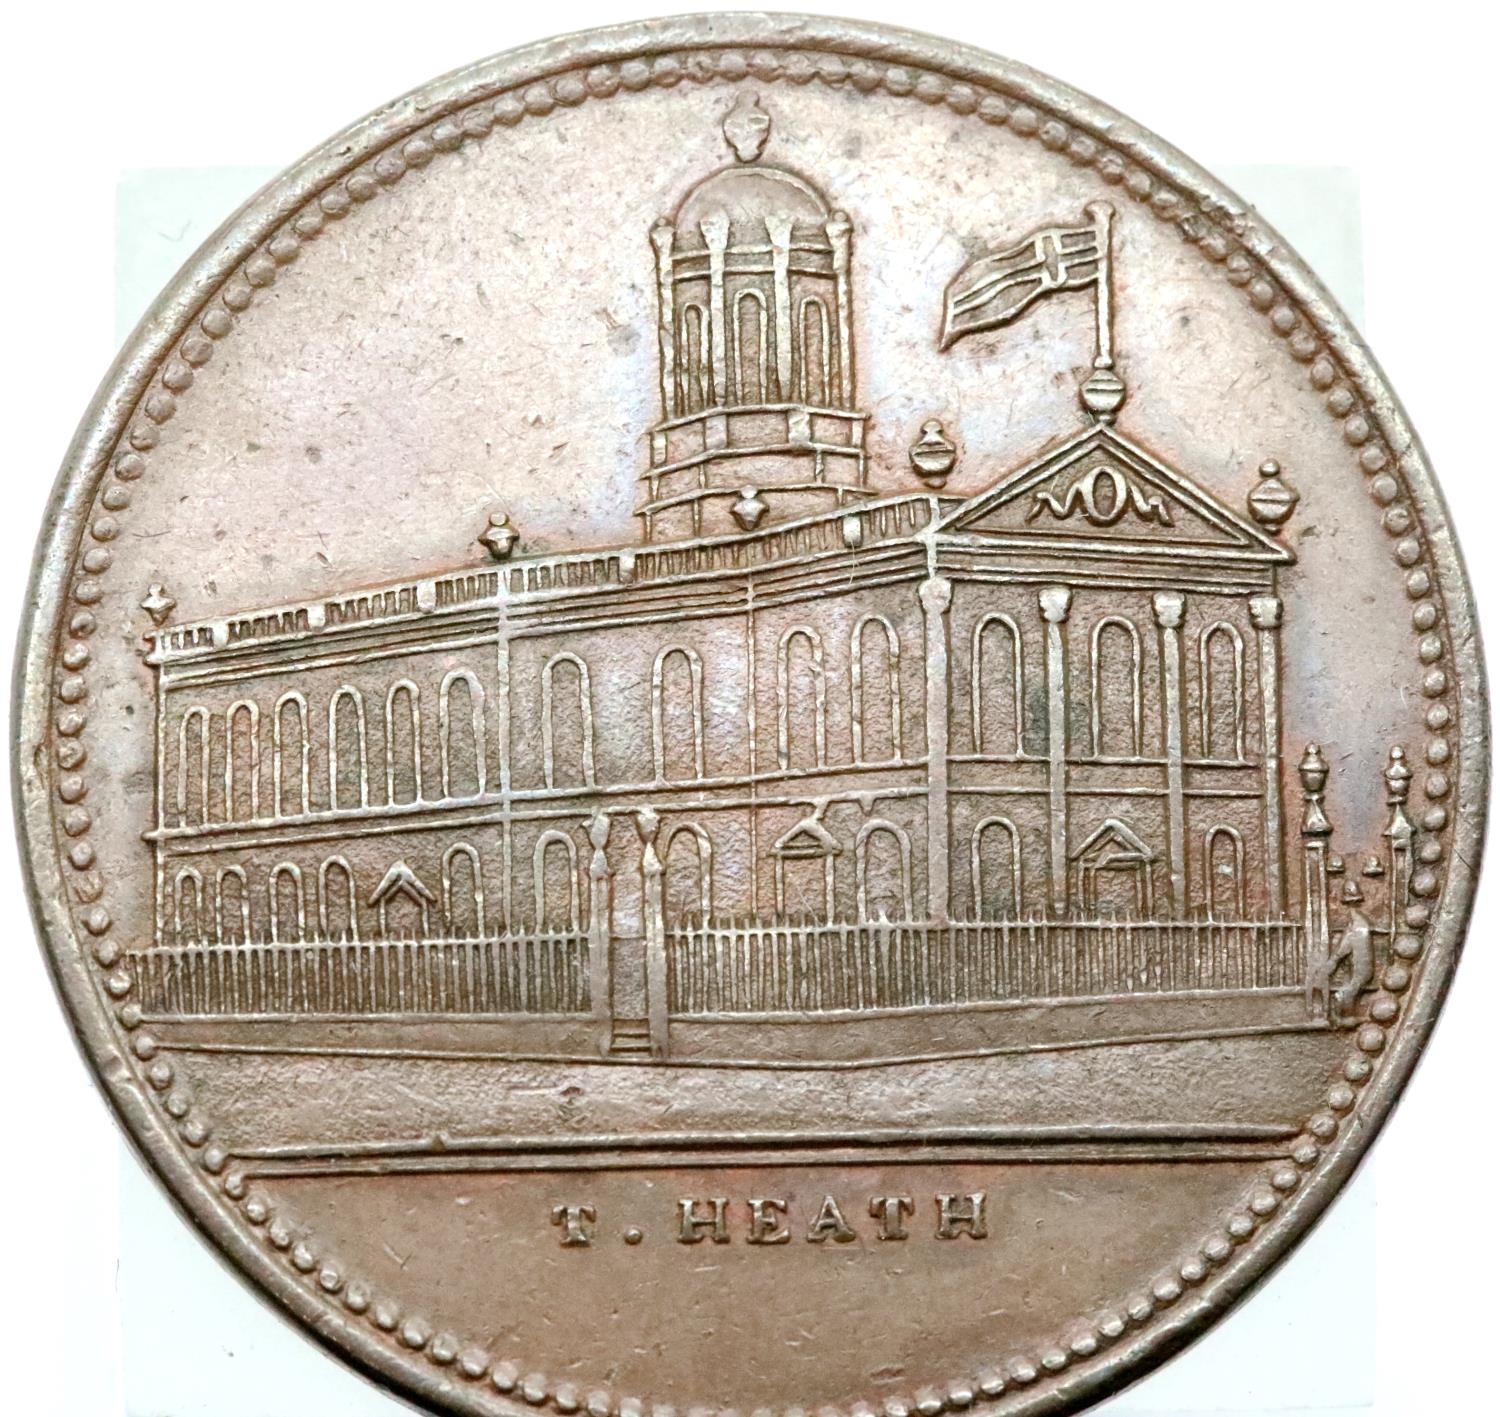 Liverpool Coliseum 1850 token with good definition. P&P Group 1 (£14+VAT for the first lot and £1+